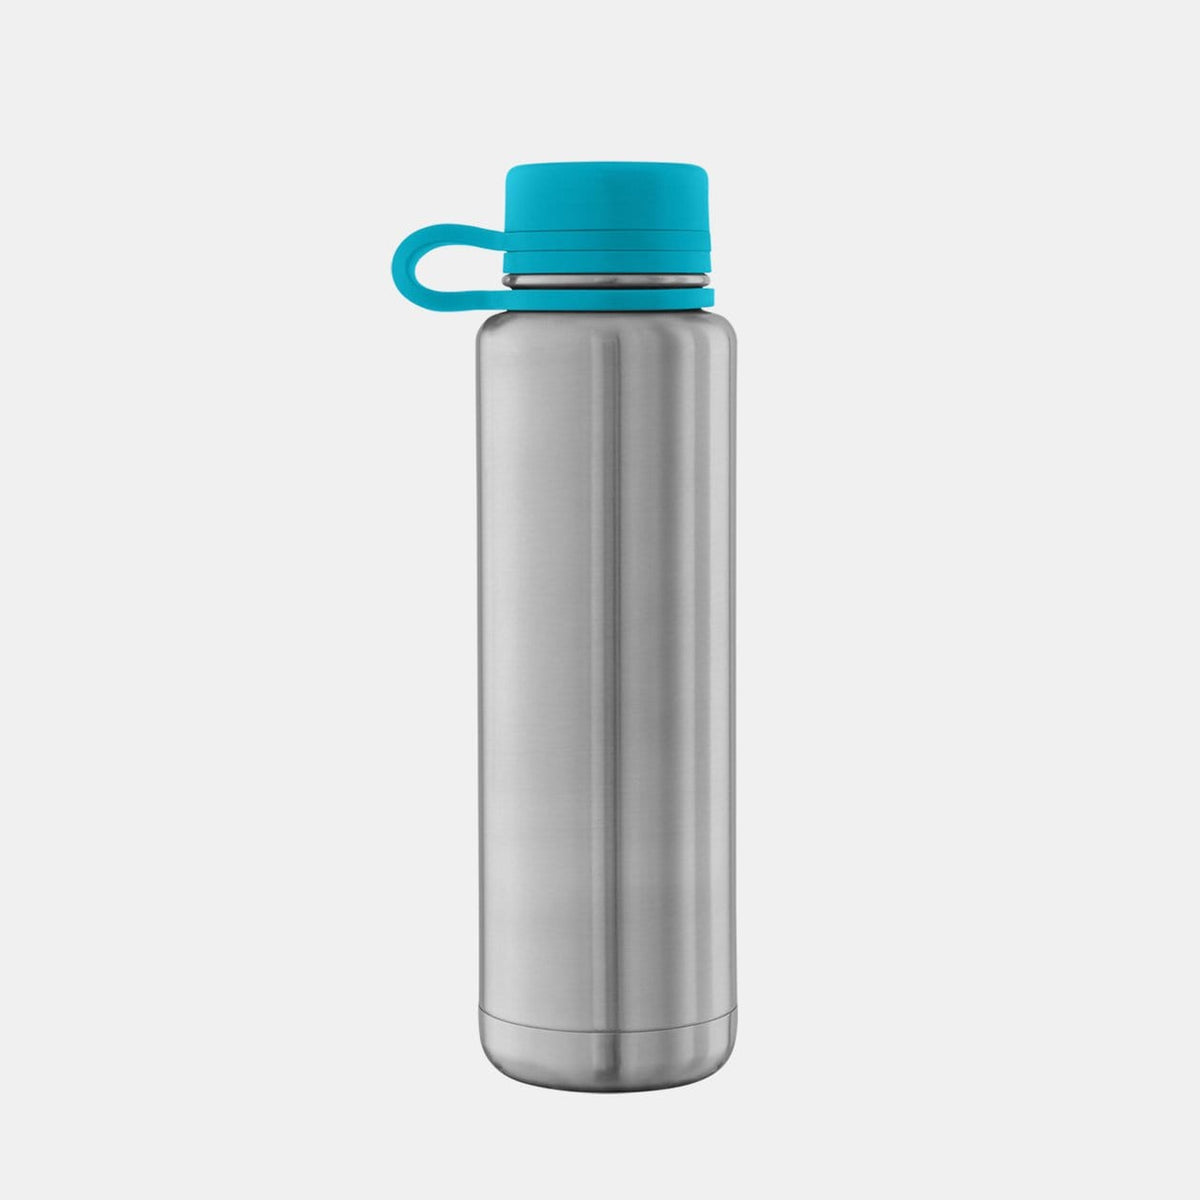 Planetbox Silicone Water Bottle Boot - Teal